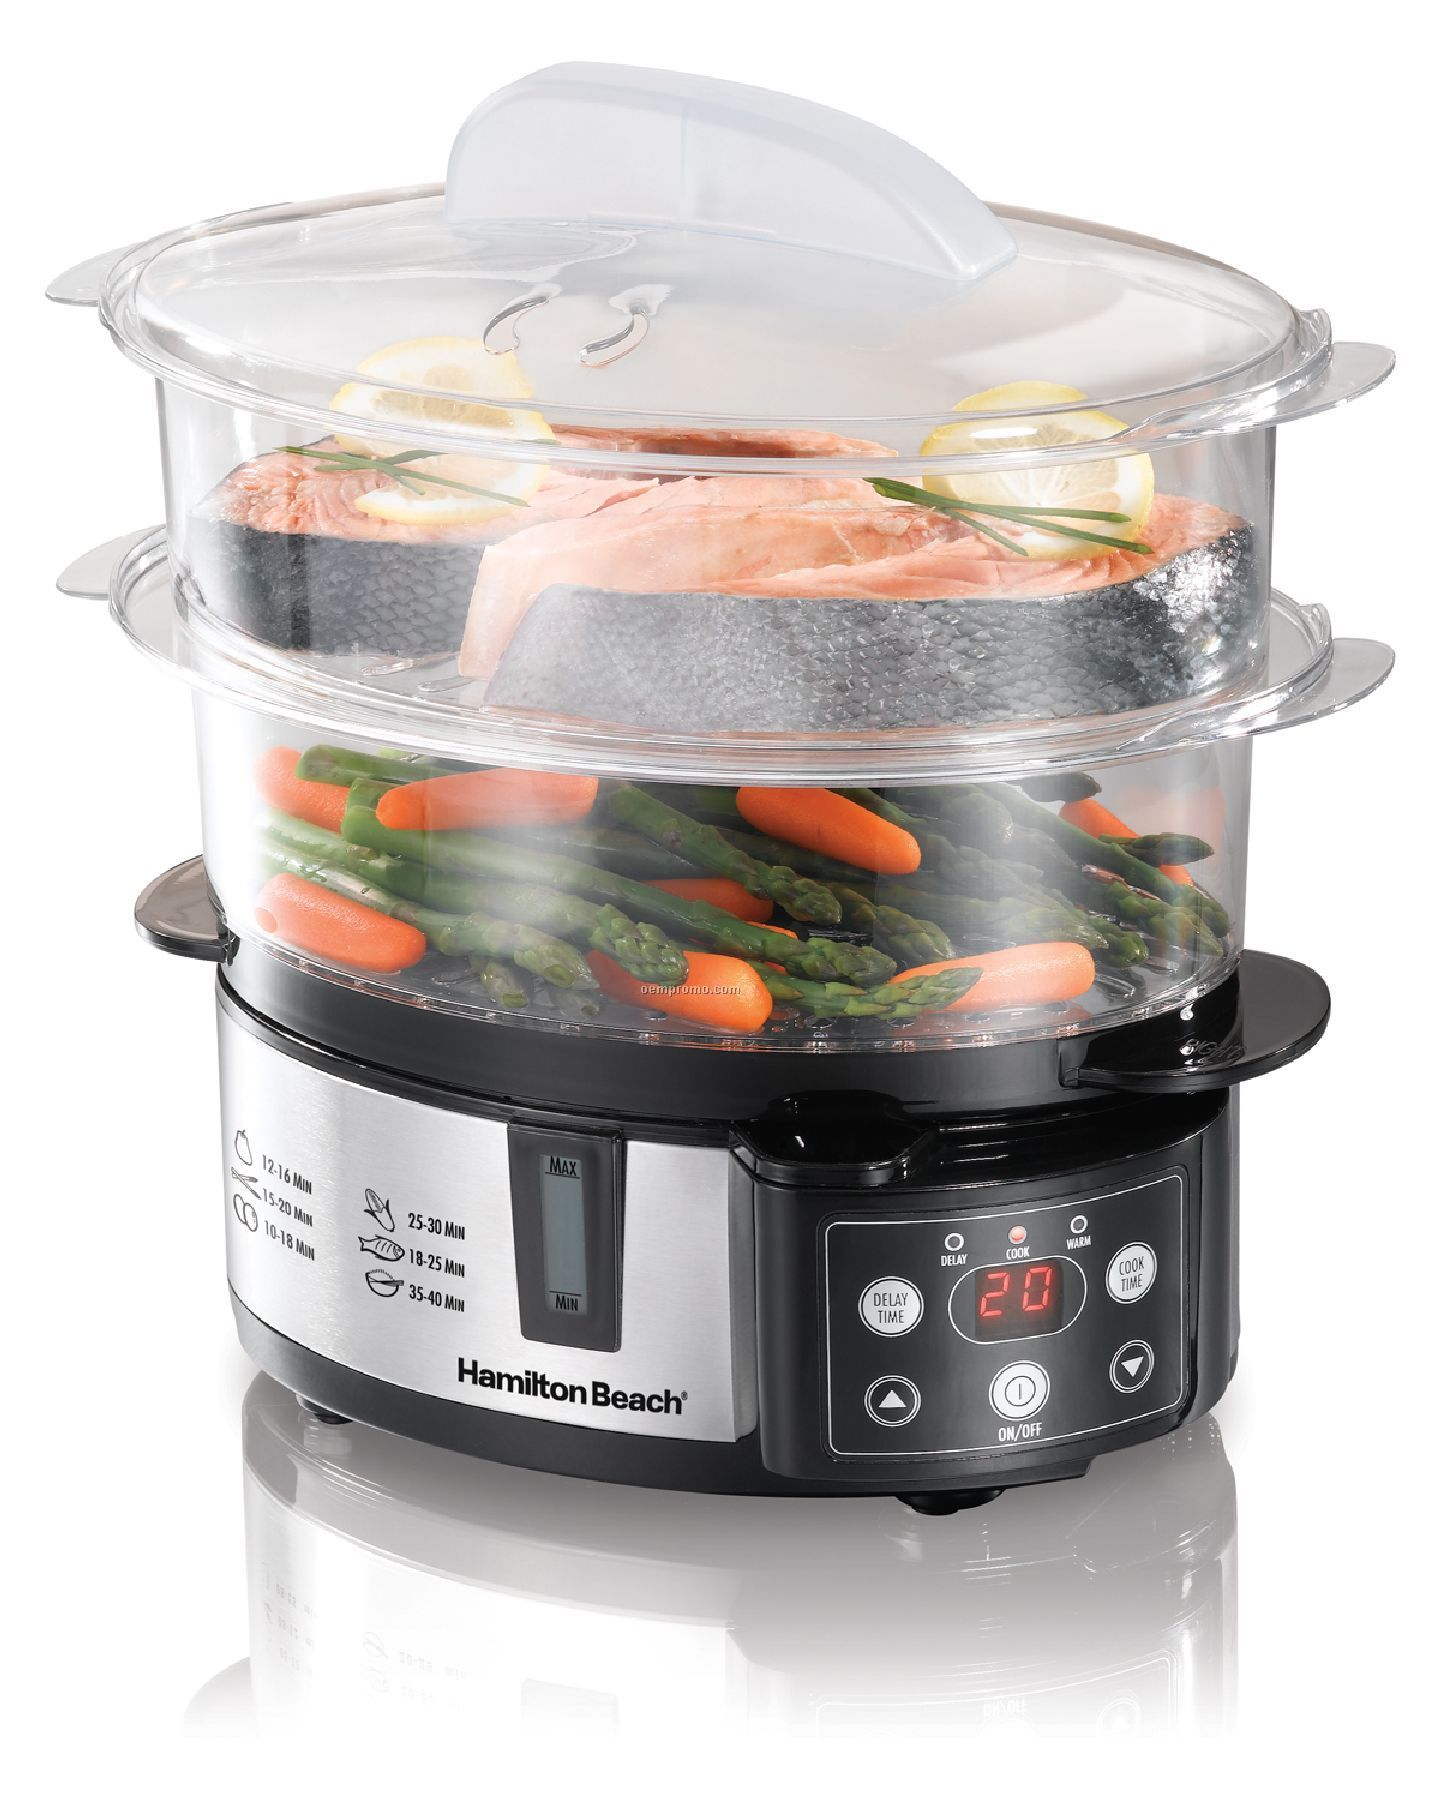 Hamilton Beach - Rice Cookers - 2-tier Food Steamer